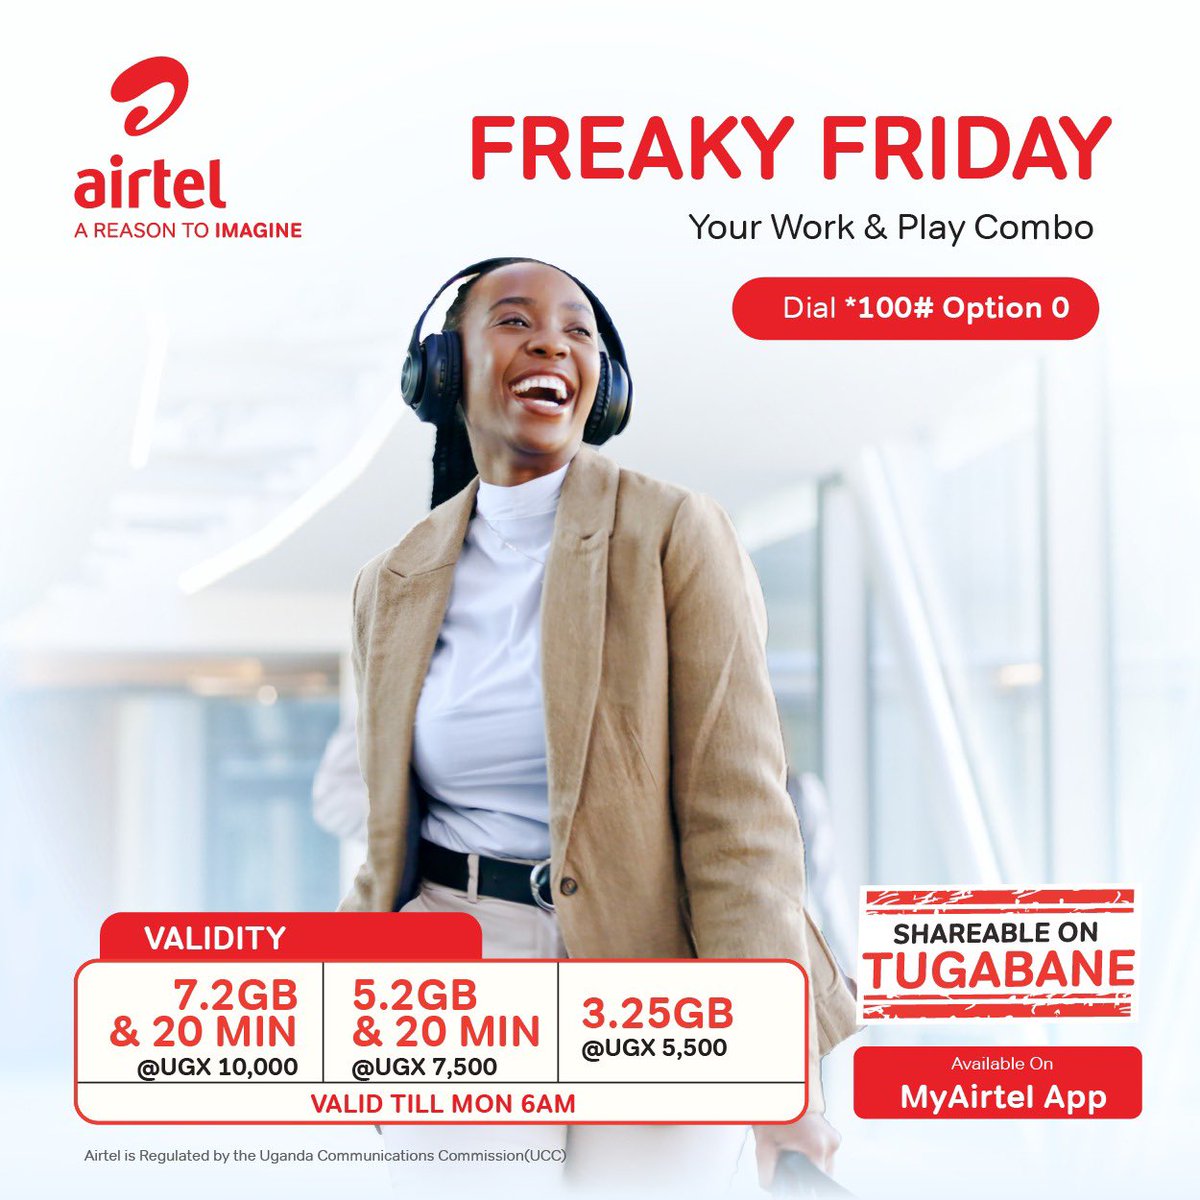 It’s a Friday!!! Enjoy the weekend with @Airtel_Ug #FreakyFriday Bundles. Dial *100*0# select #FreakyFriday to get; •7.2GB+20Min at 10,000/= •5.2GB+20Min at 7,500/= •3.25GB at 5,500/= valid till Monday #MyAirtelApp #FreakyFriday